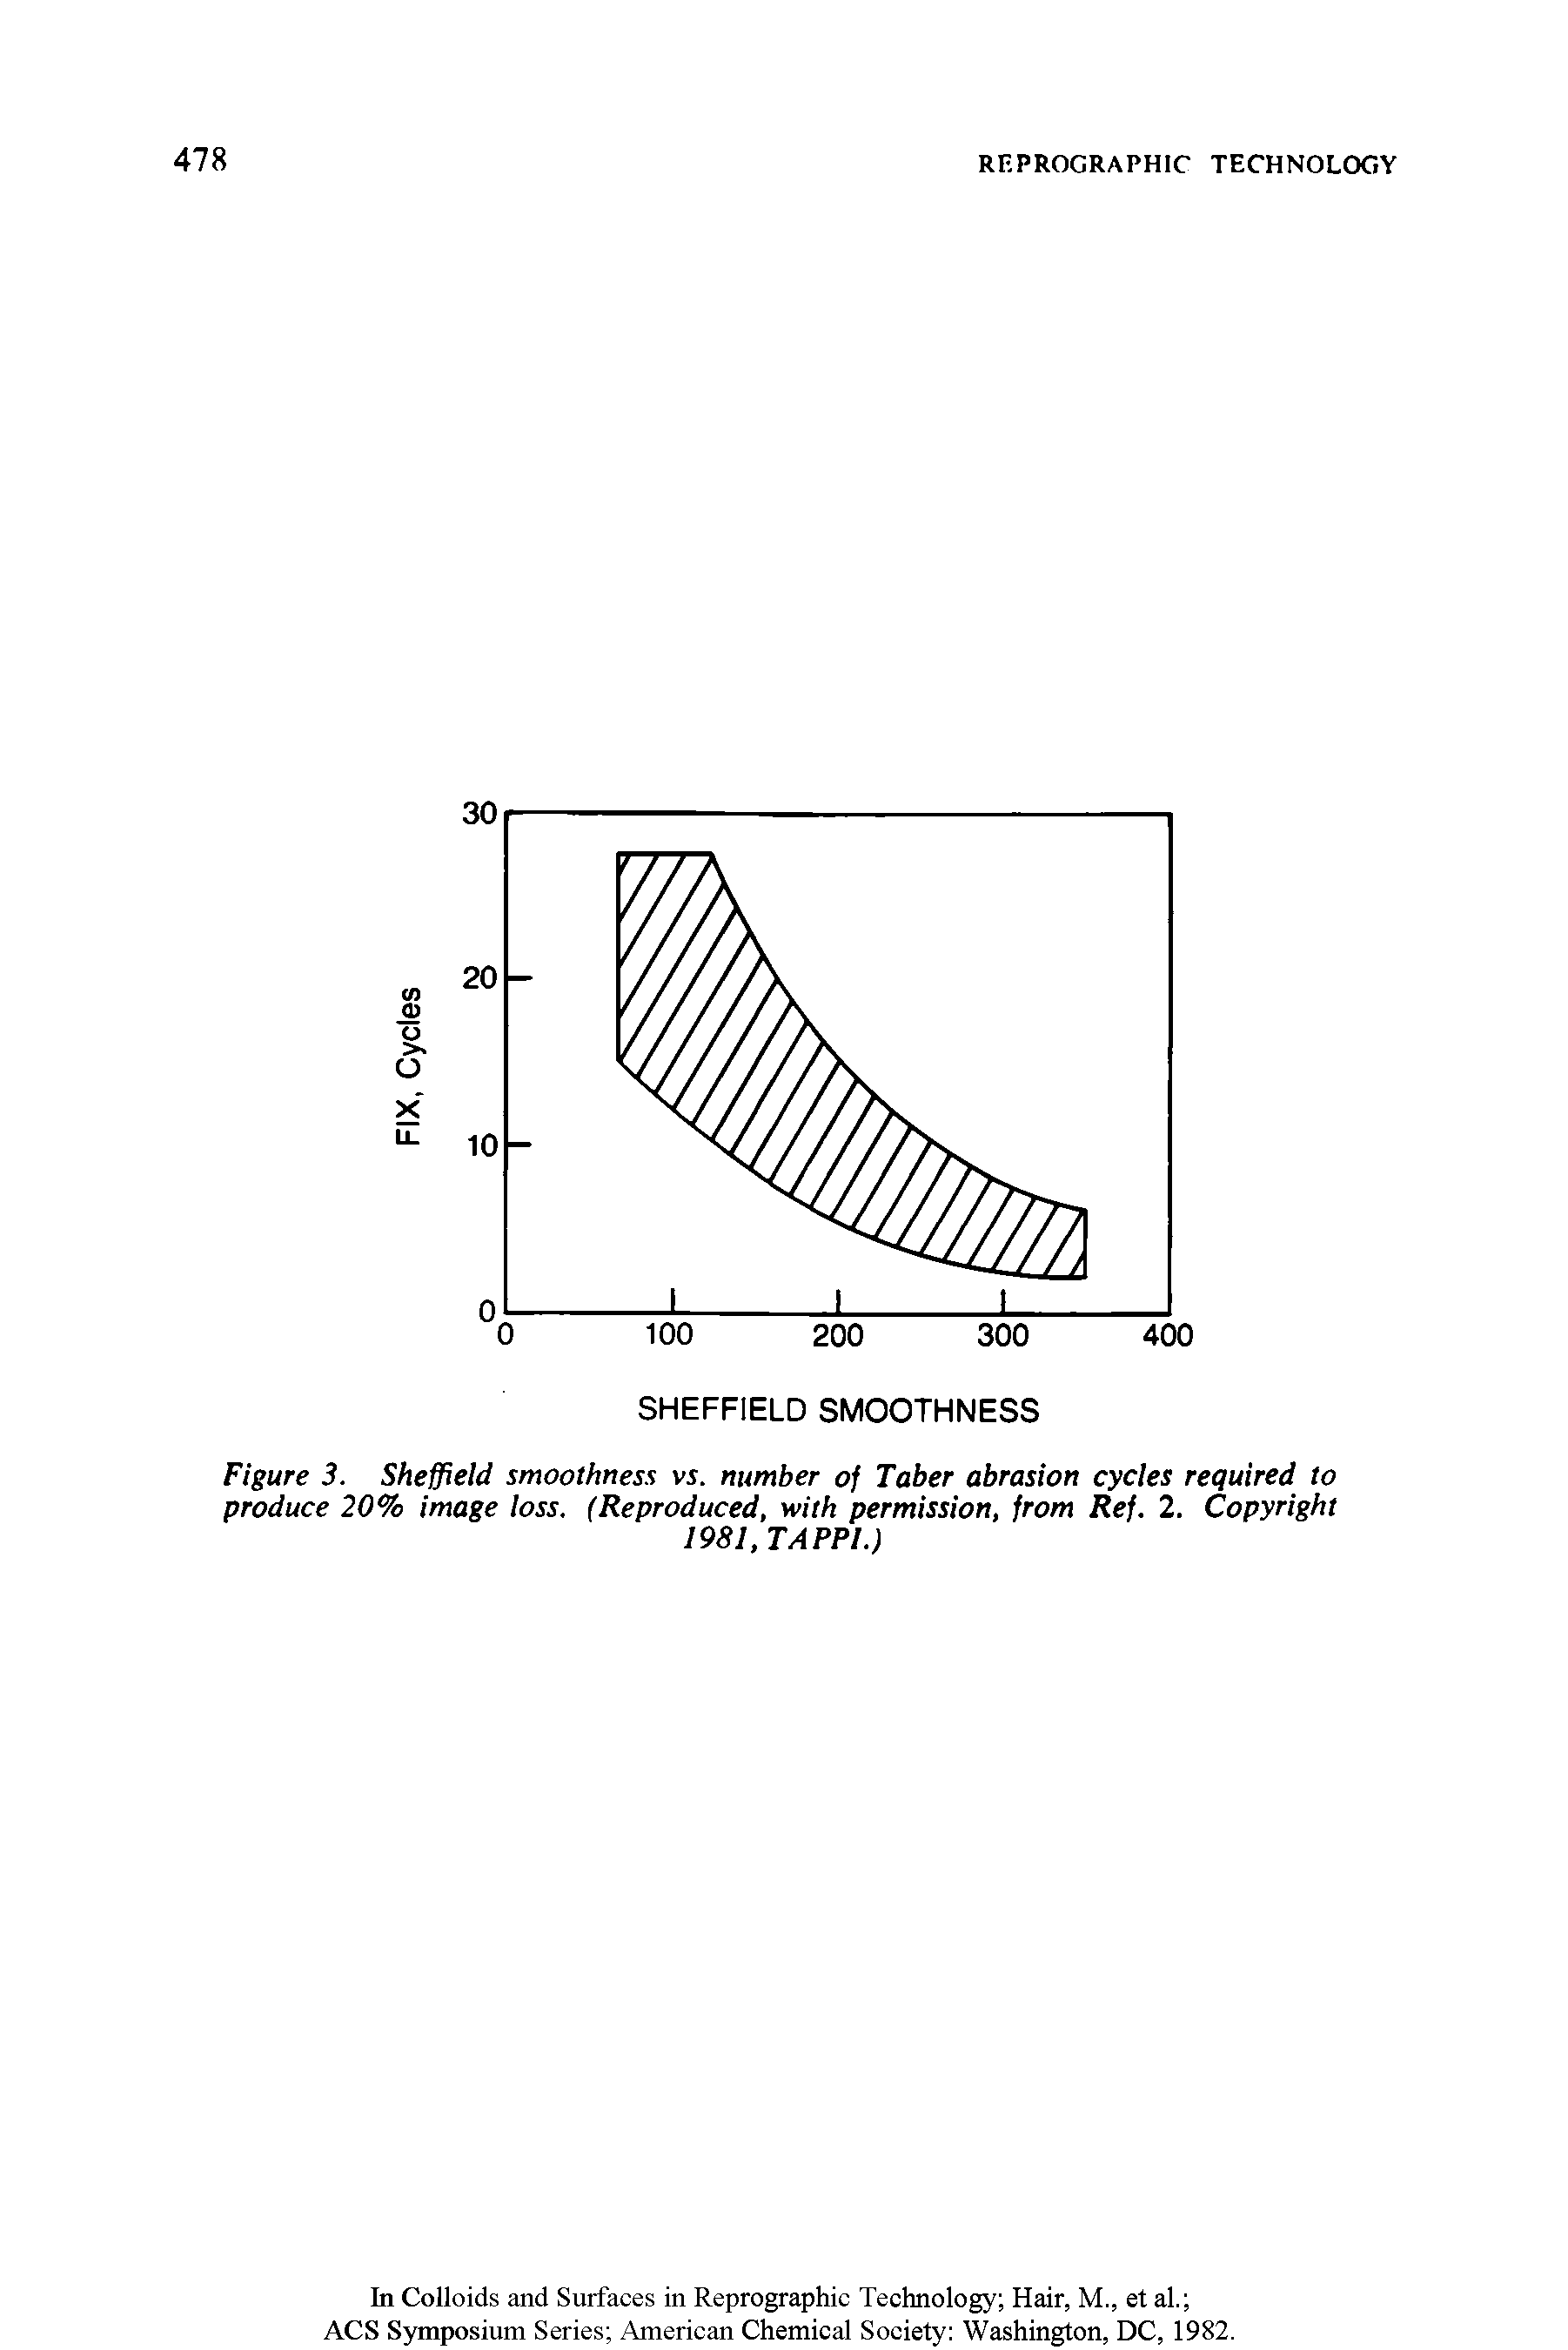 Figure 3. Sheffield smoothness vs. number of Taber abrasion cycles required to produce 20% image loss. (Reproduced, with permission, from Ref. 2. Copyright...